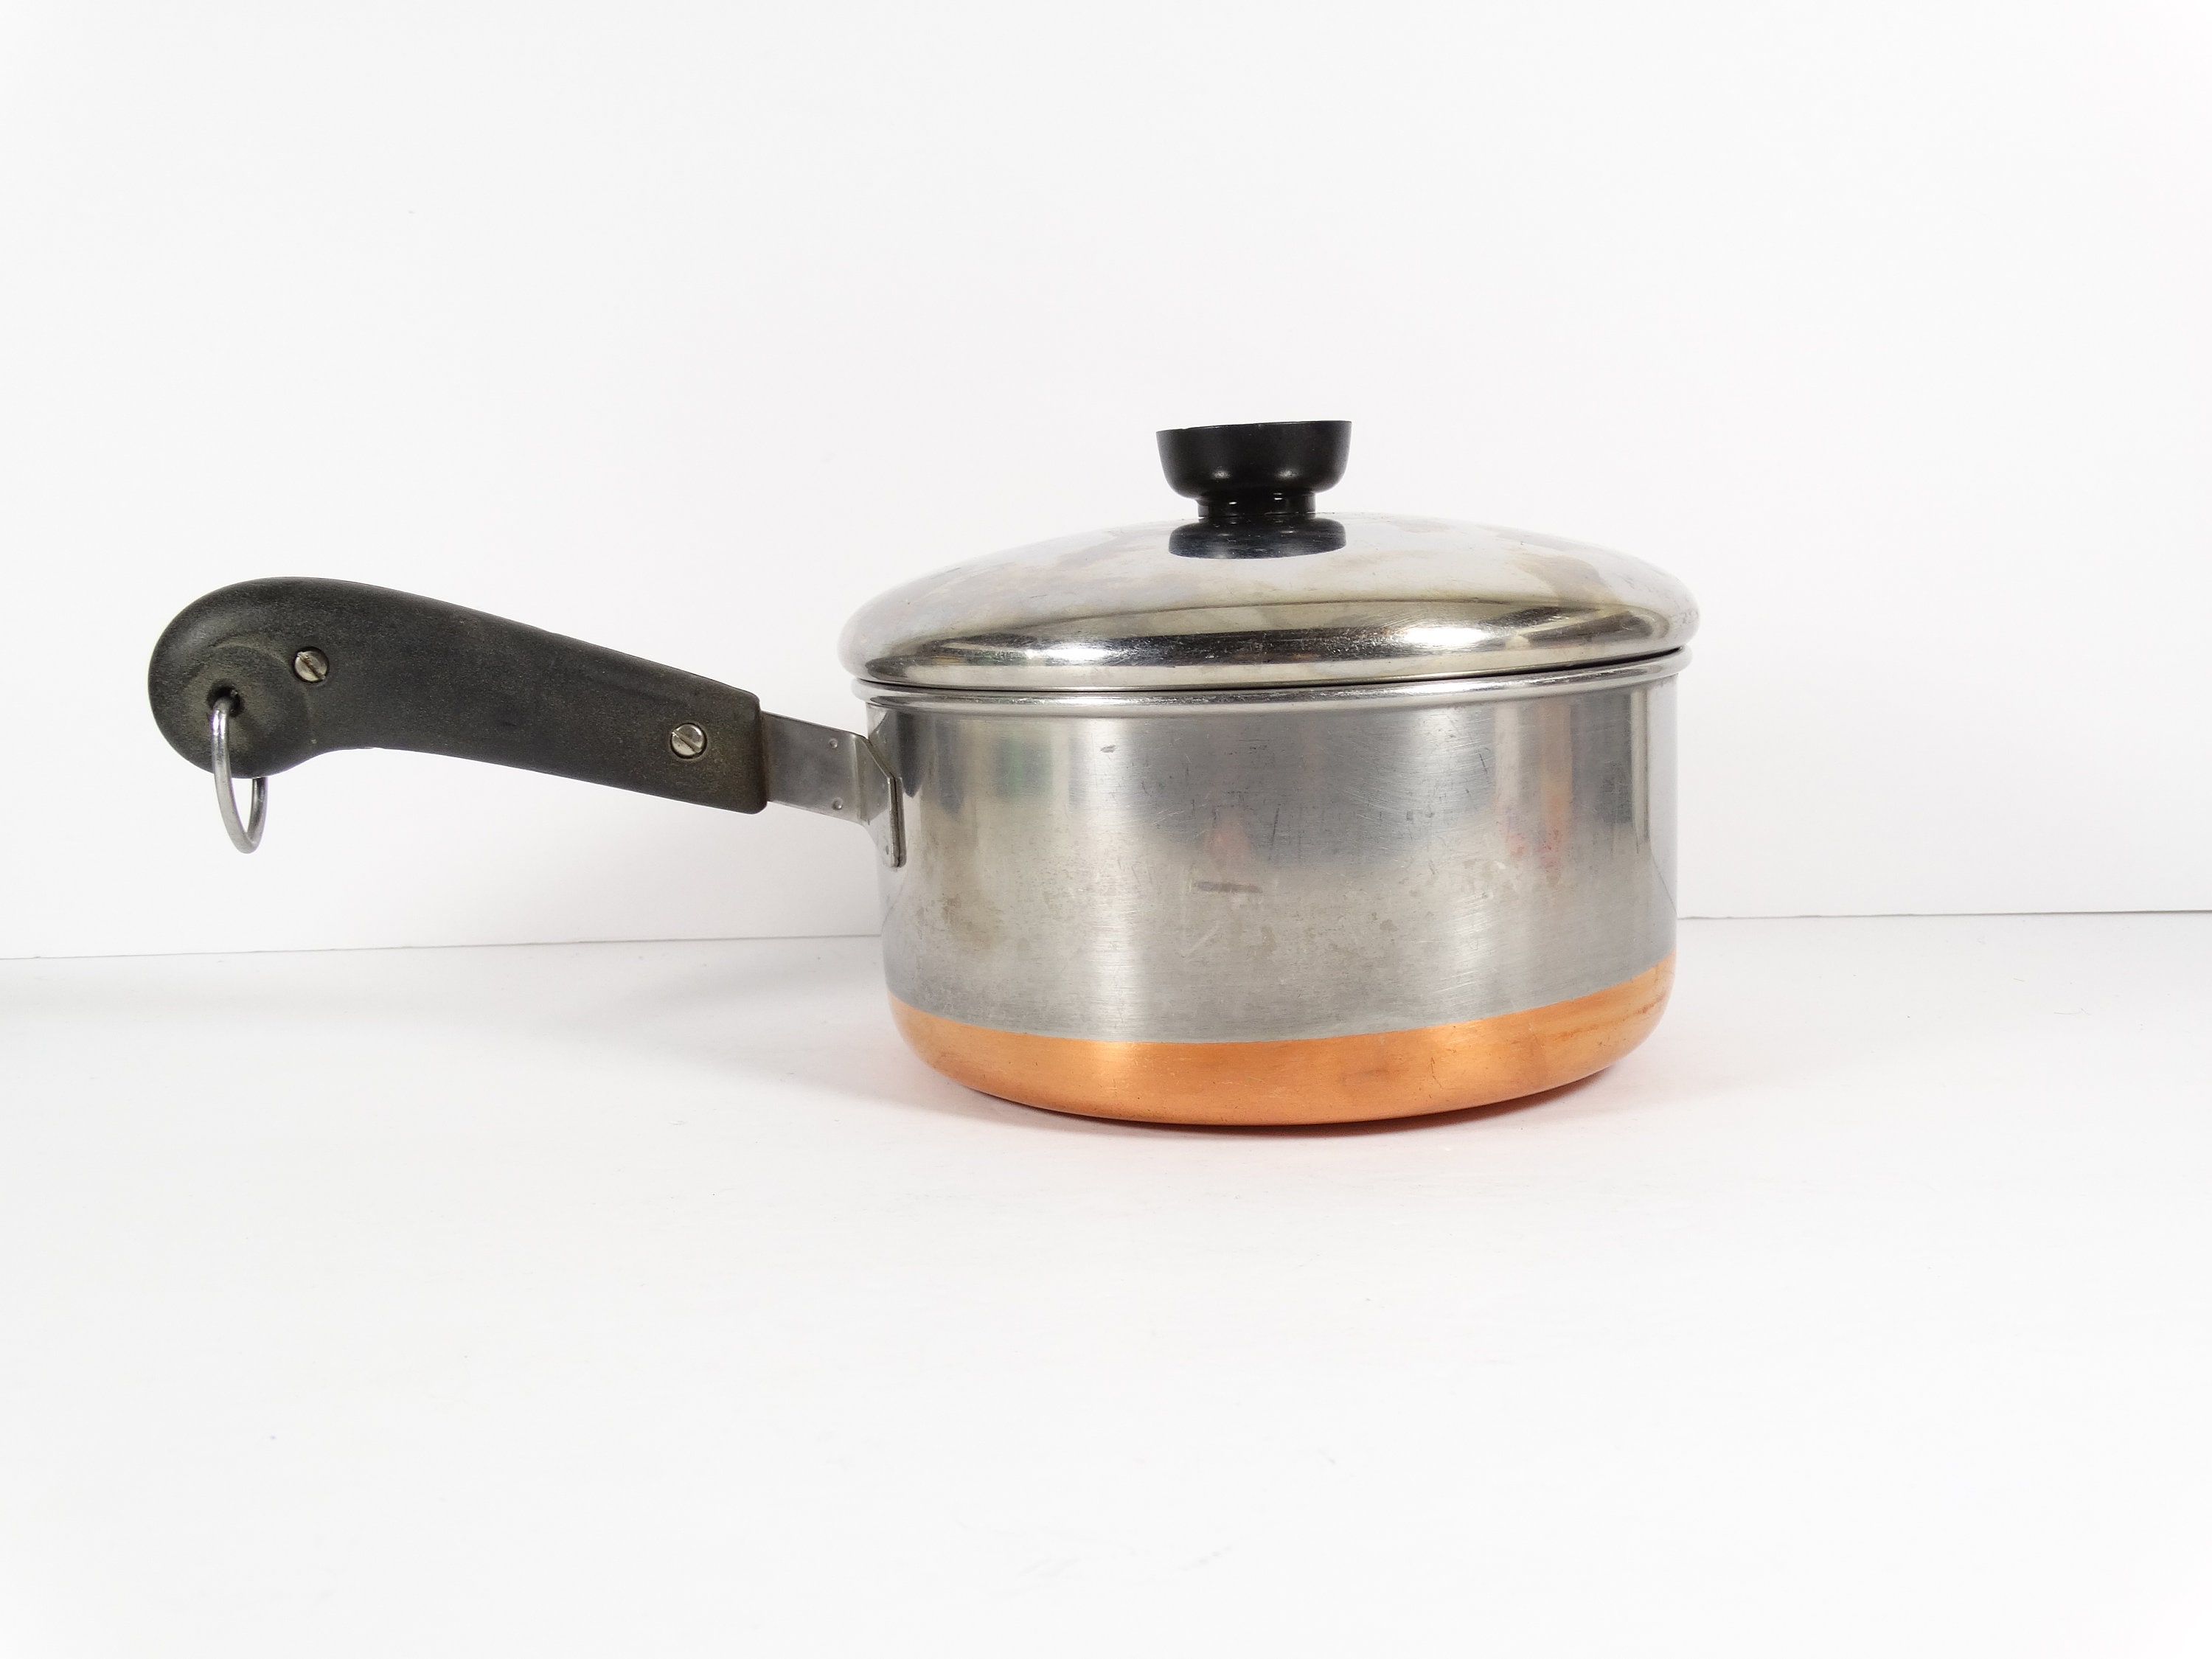 Vintage Revere Ware Copper Bottom 7 Inch Skillet With Lid, Process Patent,  1 Quart Combination Pan, Revere Ware 1801 